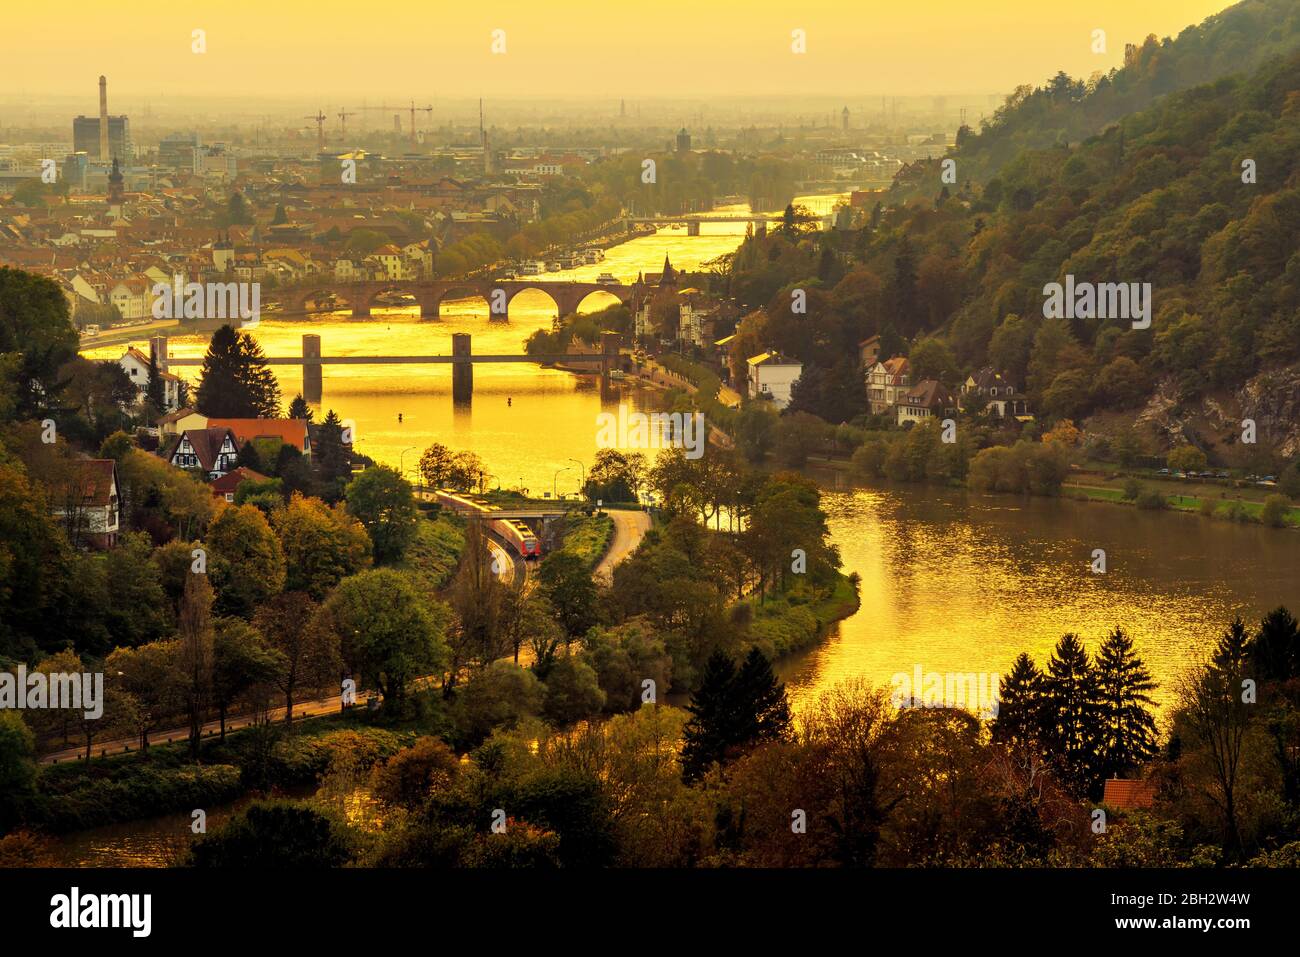 Heidelberg and the Neckar river, Germany, at a gold sunset, shot from above with a yellow filter to enhance the beautiful romantic mood Stock Photo